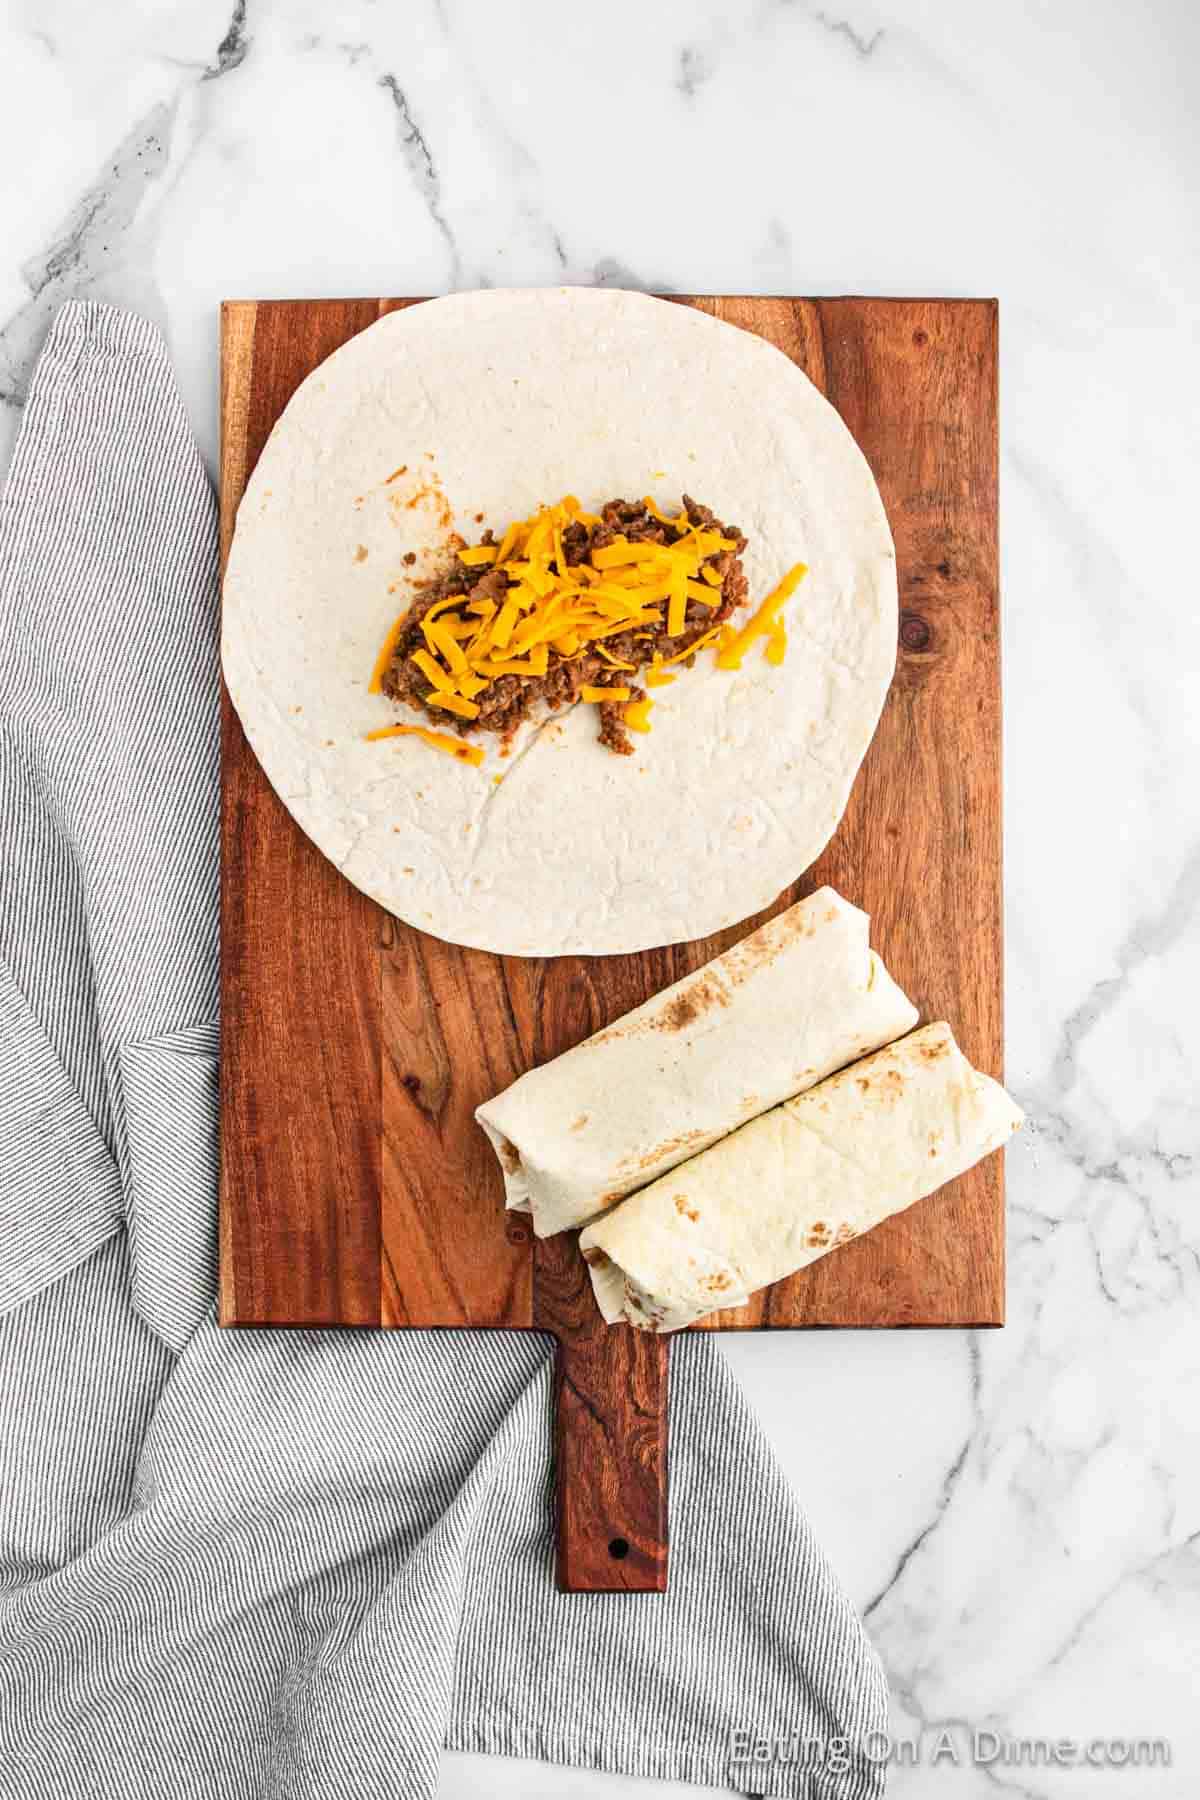 A wooden board rests on a marble surface, holding one open flour tortilla with ground beef and shredded cheddar cheese and two wrapped tortillas, poised to become delicious beef chimichangas. A gray-striped cloth is partially visible under the board.